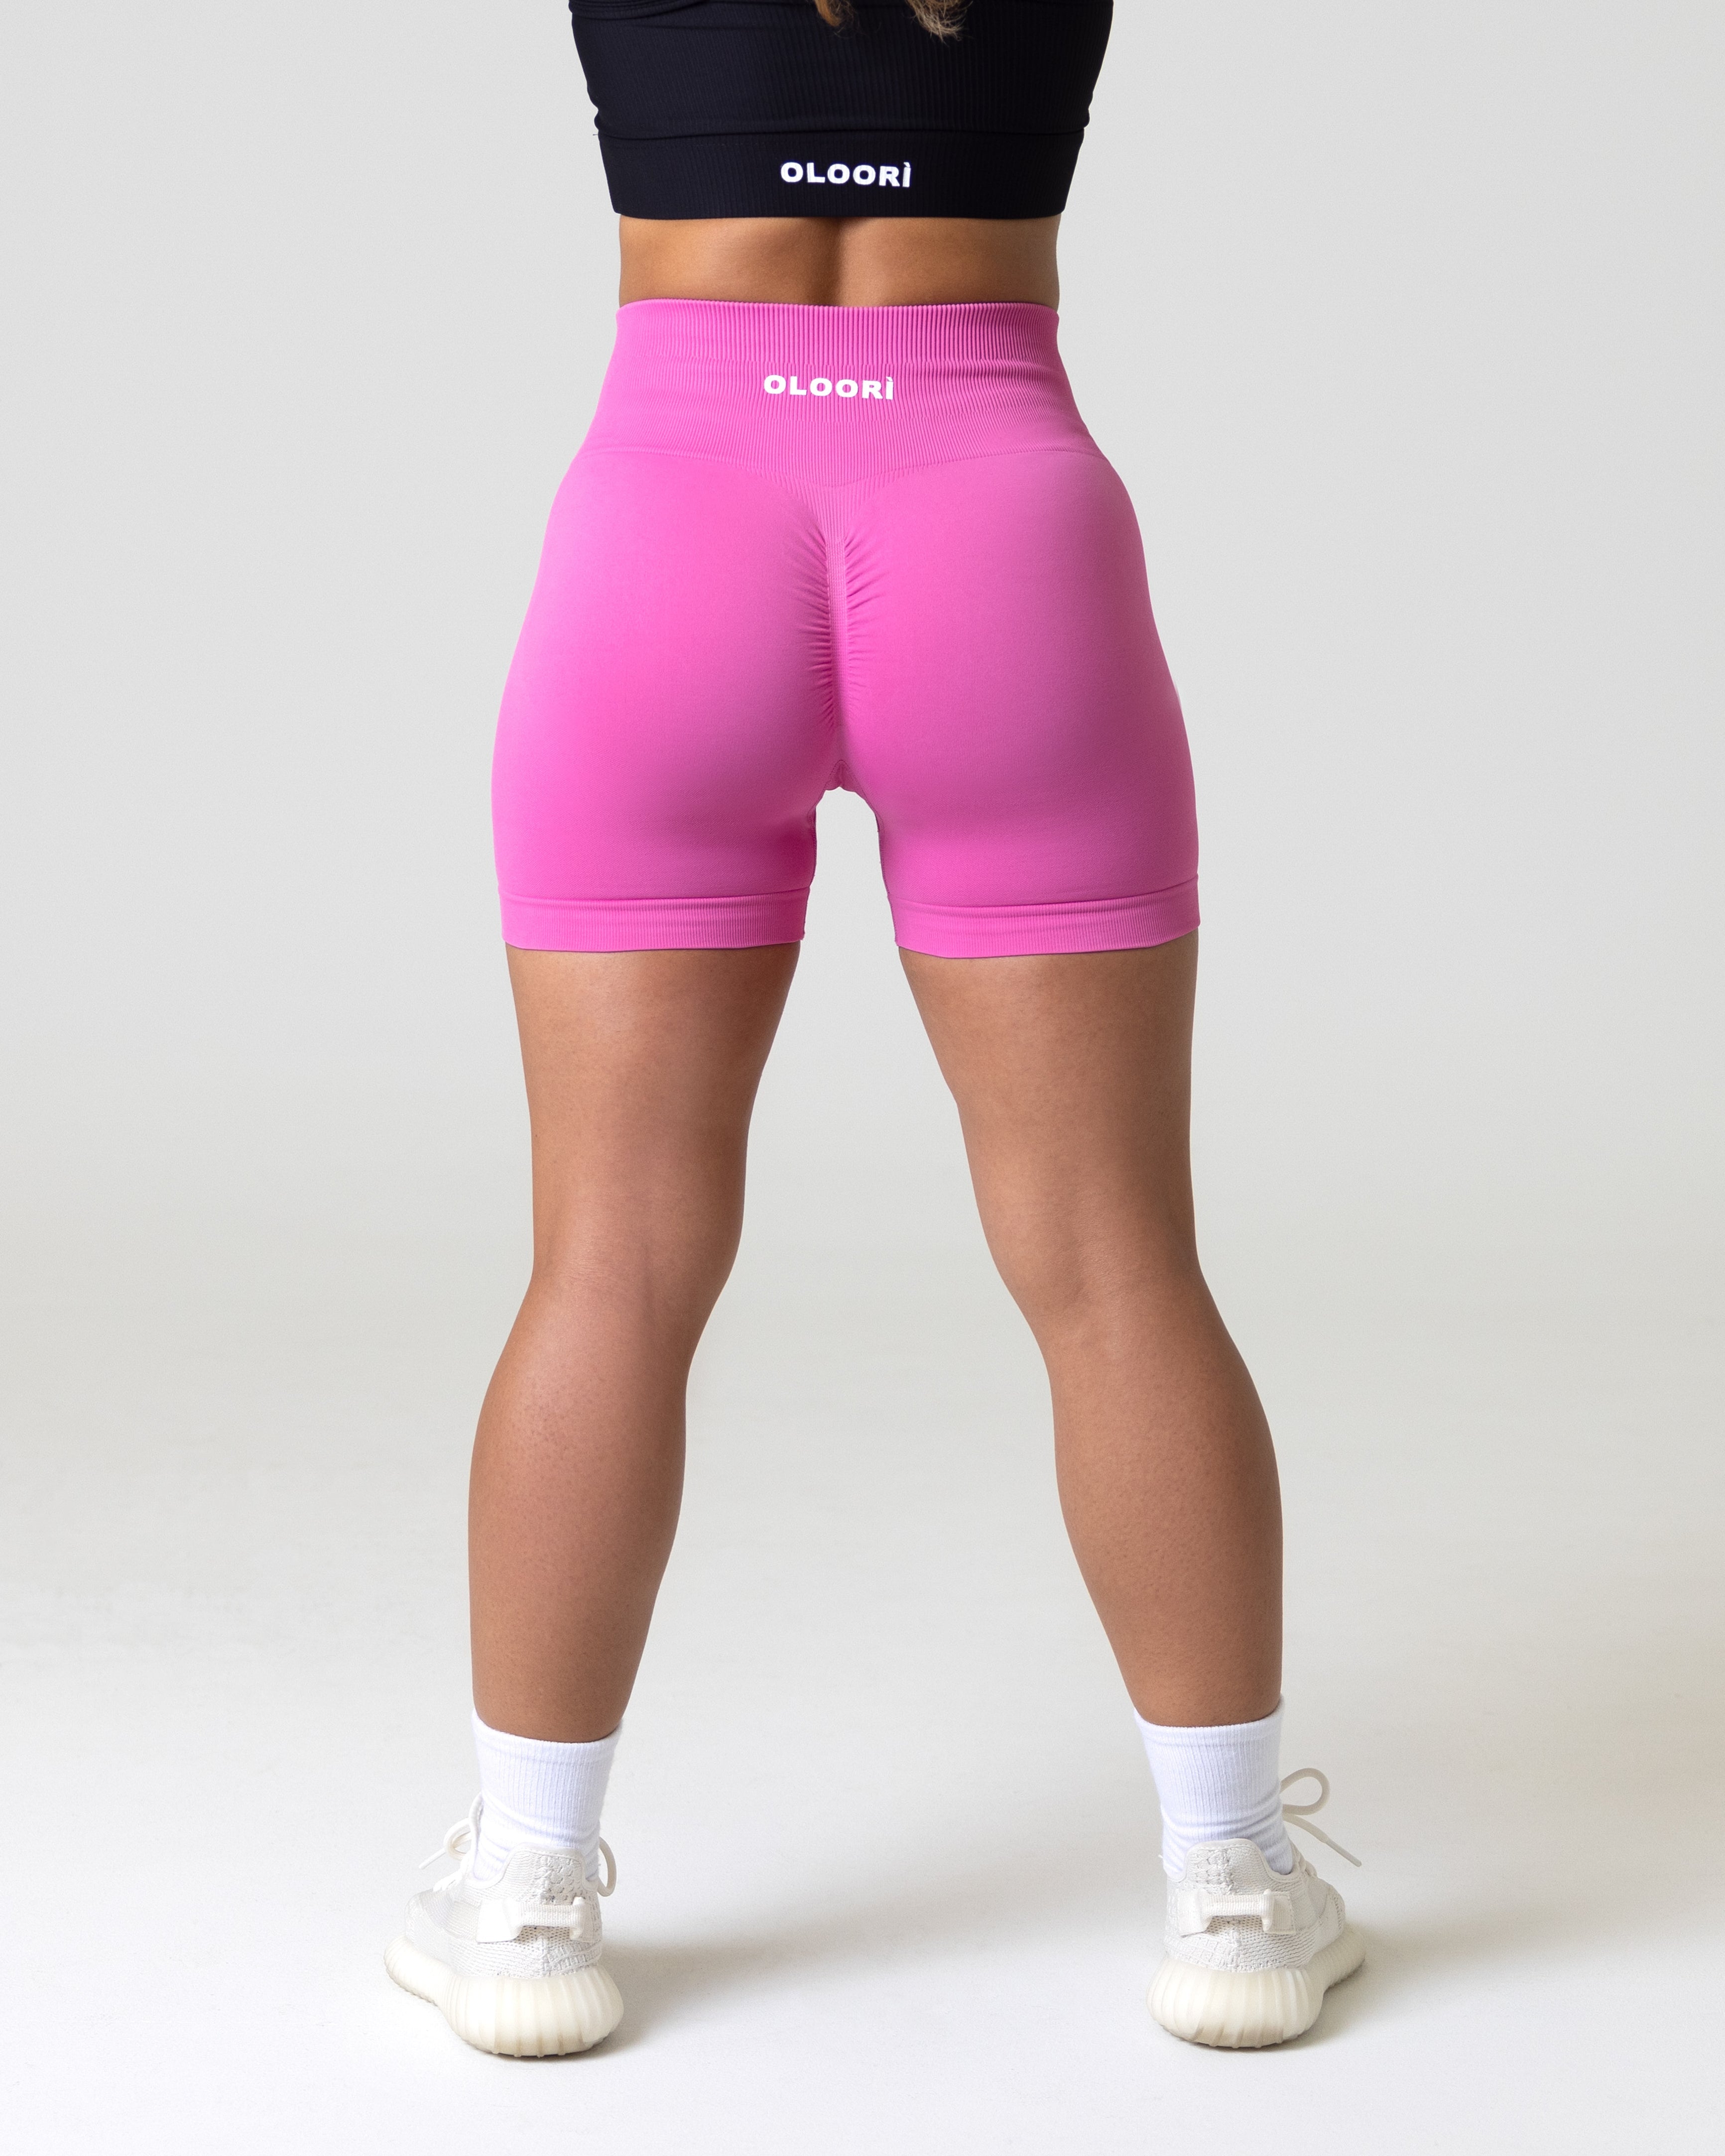 A woman wearing best workout shorts for woman